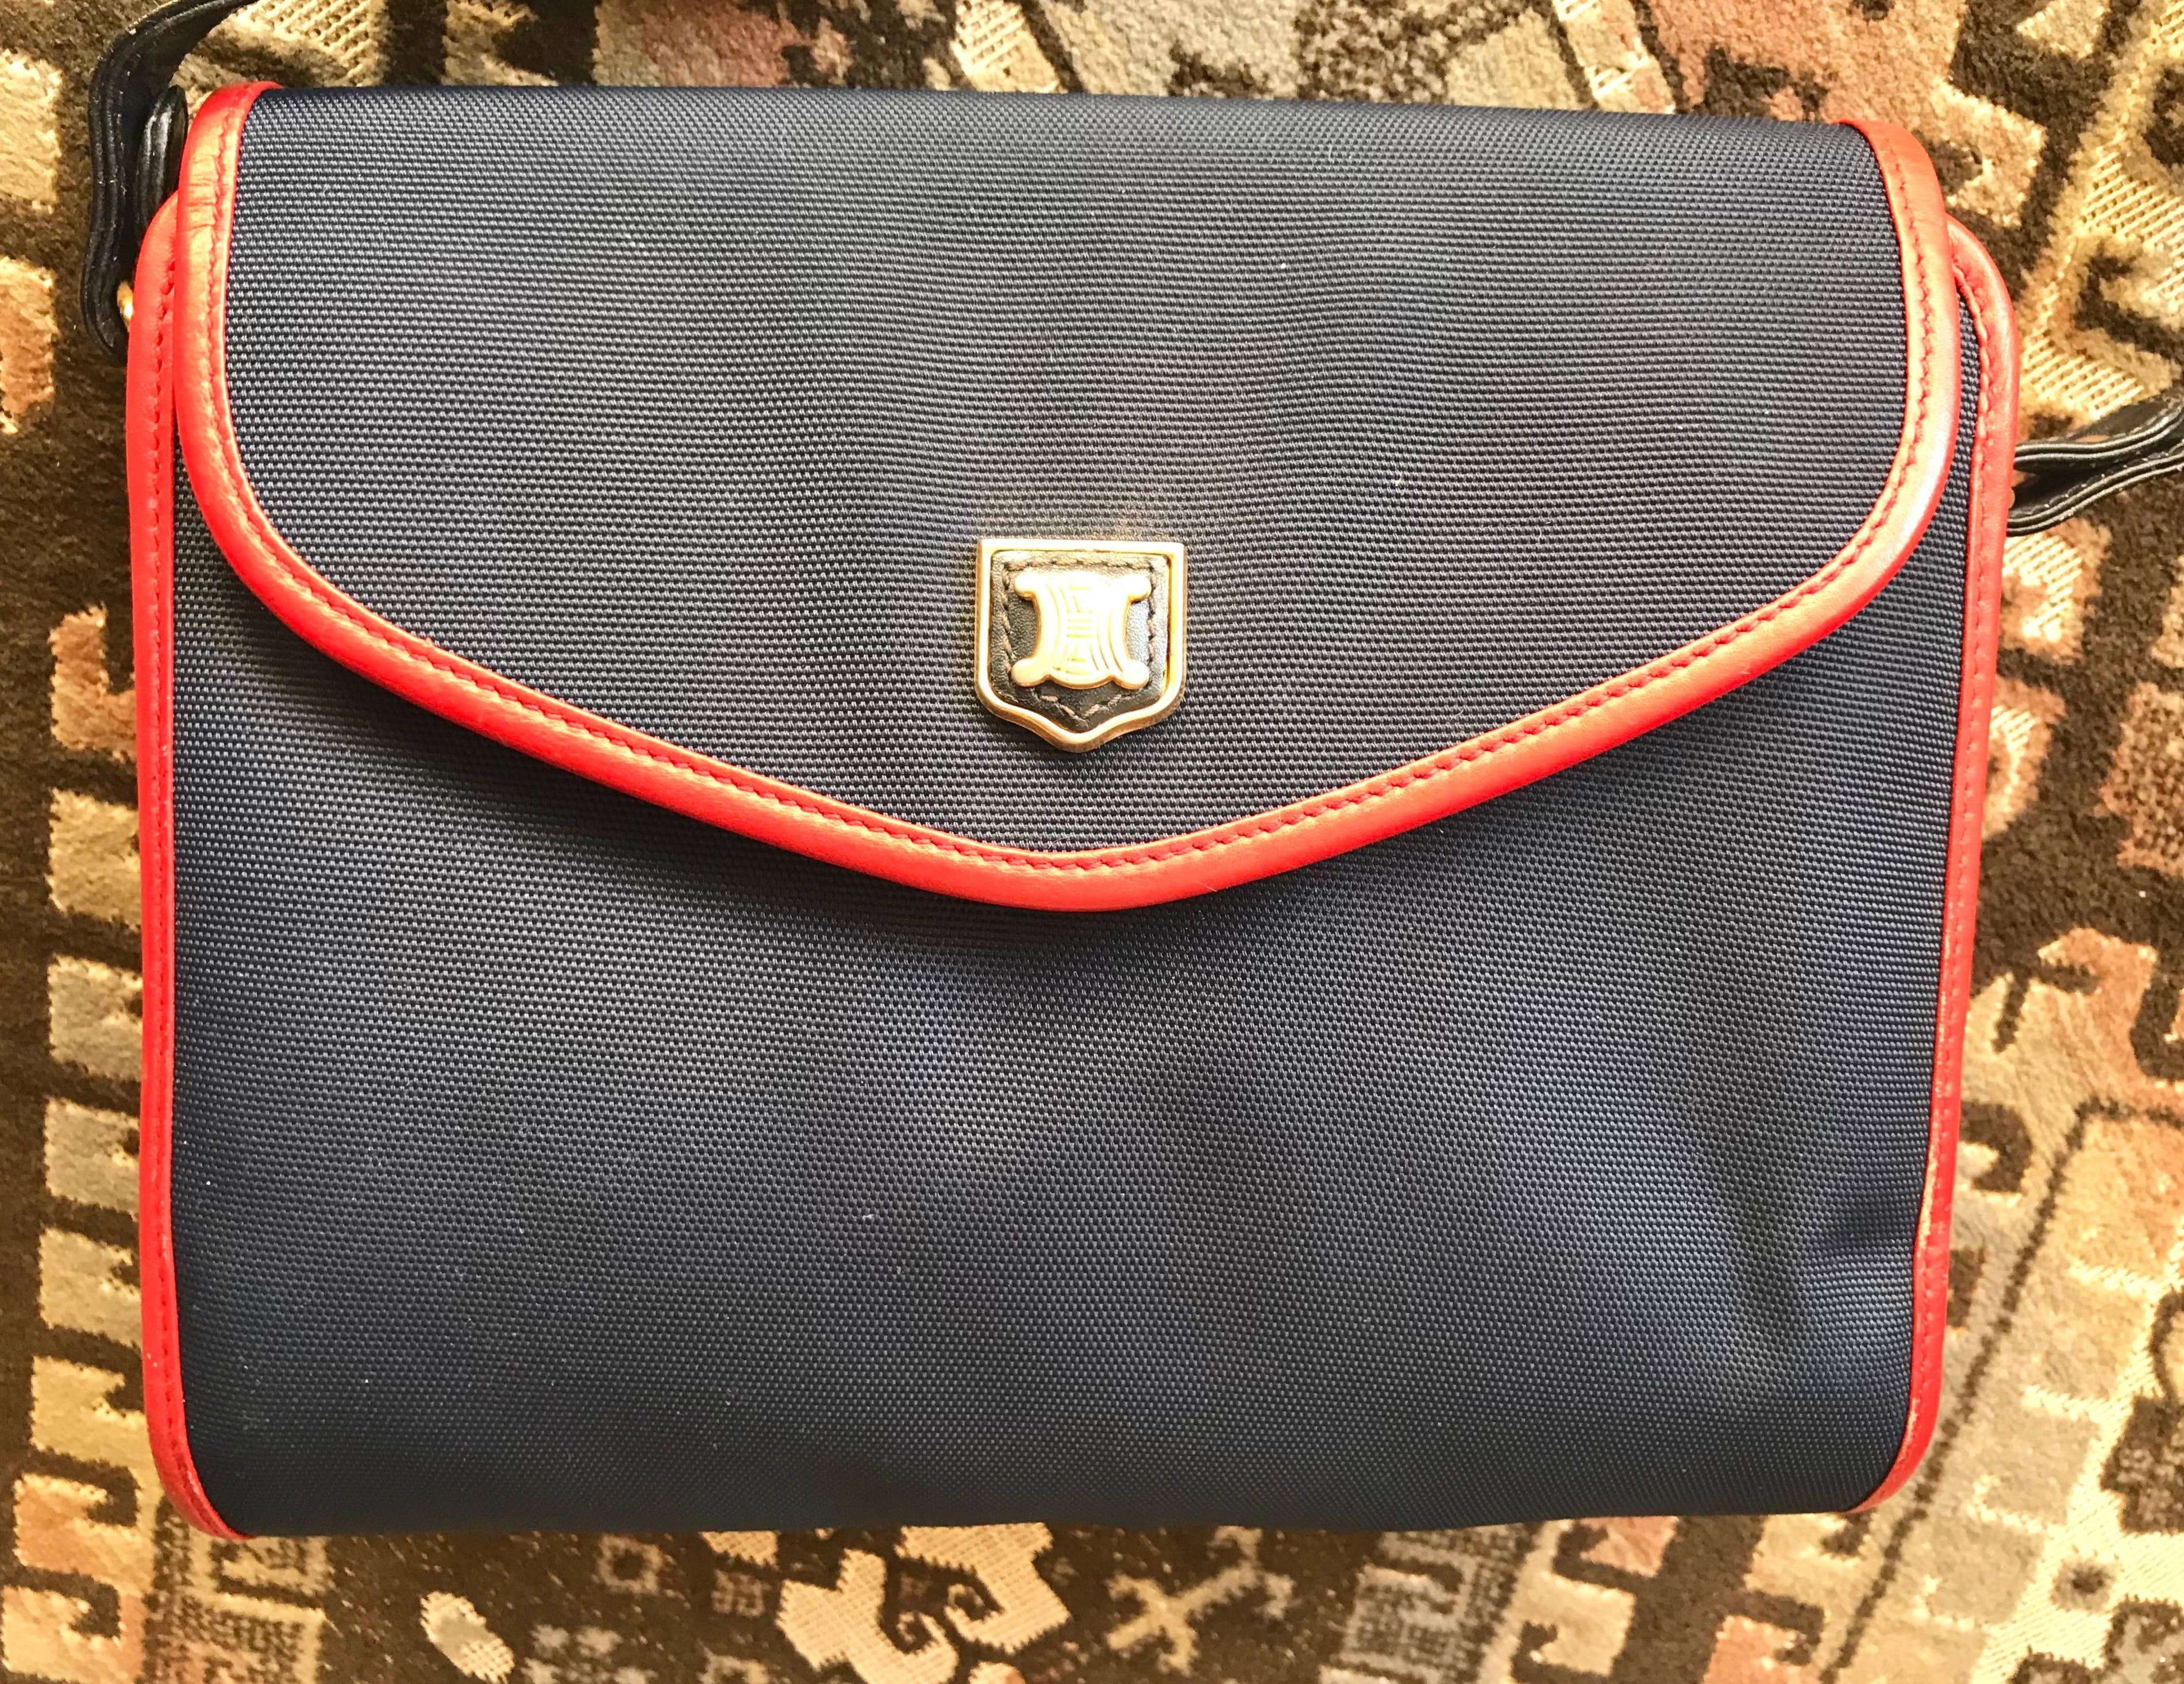 1990s. Vintage Celine navy nylon and red leather piping shoulder bag with golden blason macadam logo embossed motif on flap. riri zipper

Introducing a rare design shoulder bag from Celine back in the old era.

Featuring navy nylon fabric and red